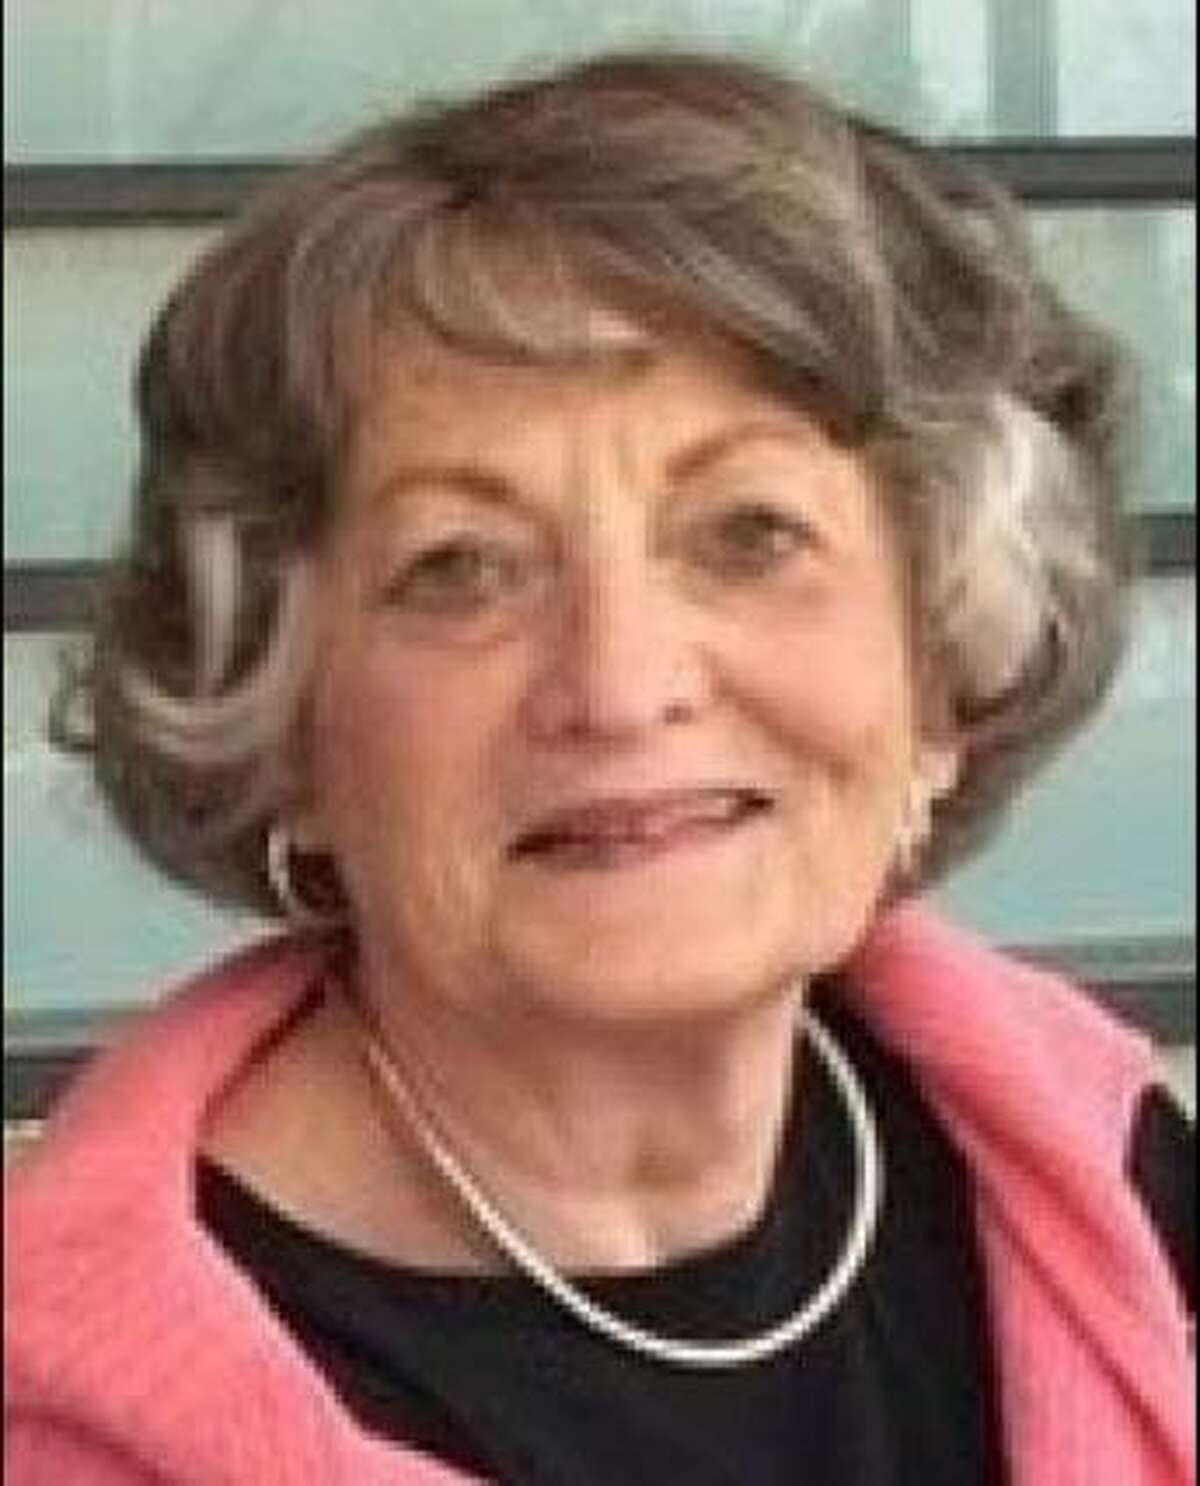 Nancy Reed, 77, died on Sept. 15 of flood-necrotizing fasciitis, according to the Harris County Institute of Forensic Sciences. She is the county’s 36th official Harvey-related death.